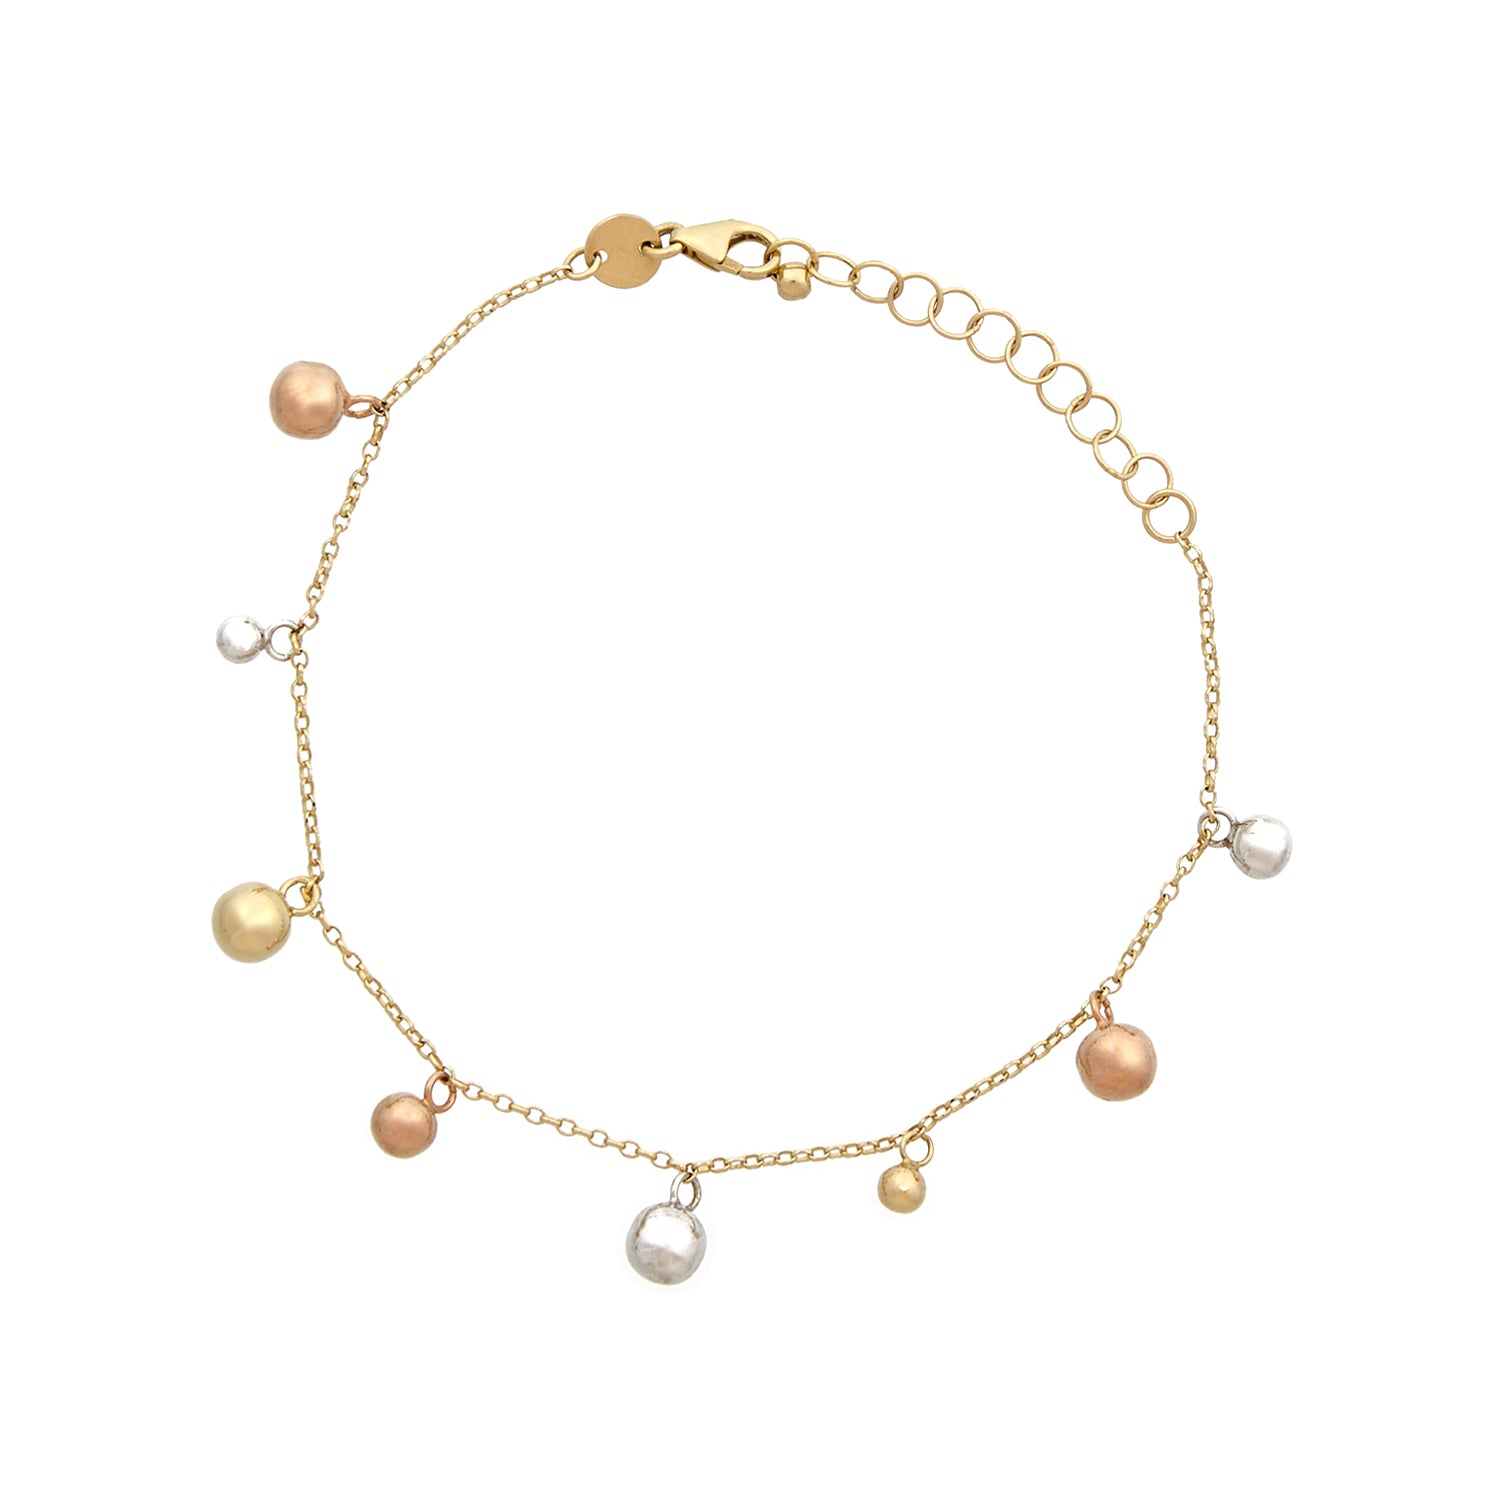 Yellow gold bracelet with charms